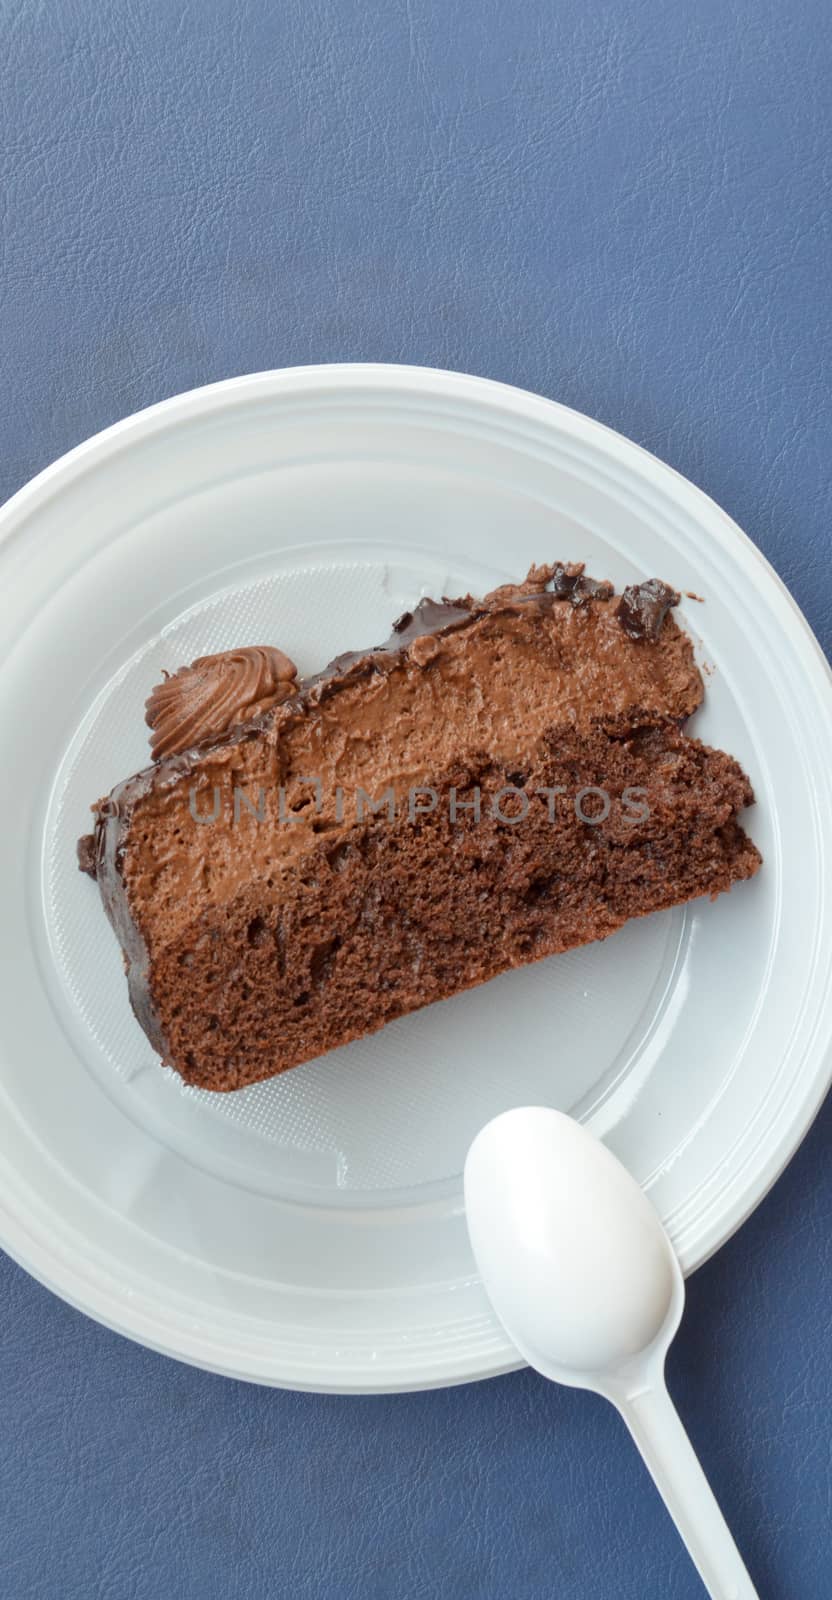 picture of a Dark chocolate cake,sweet food